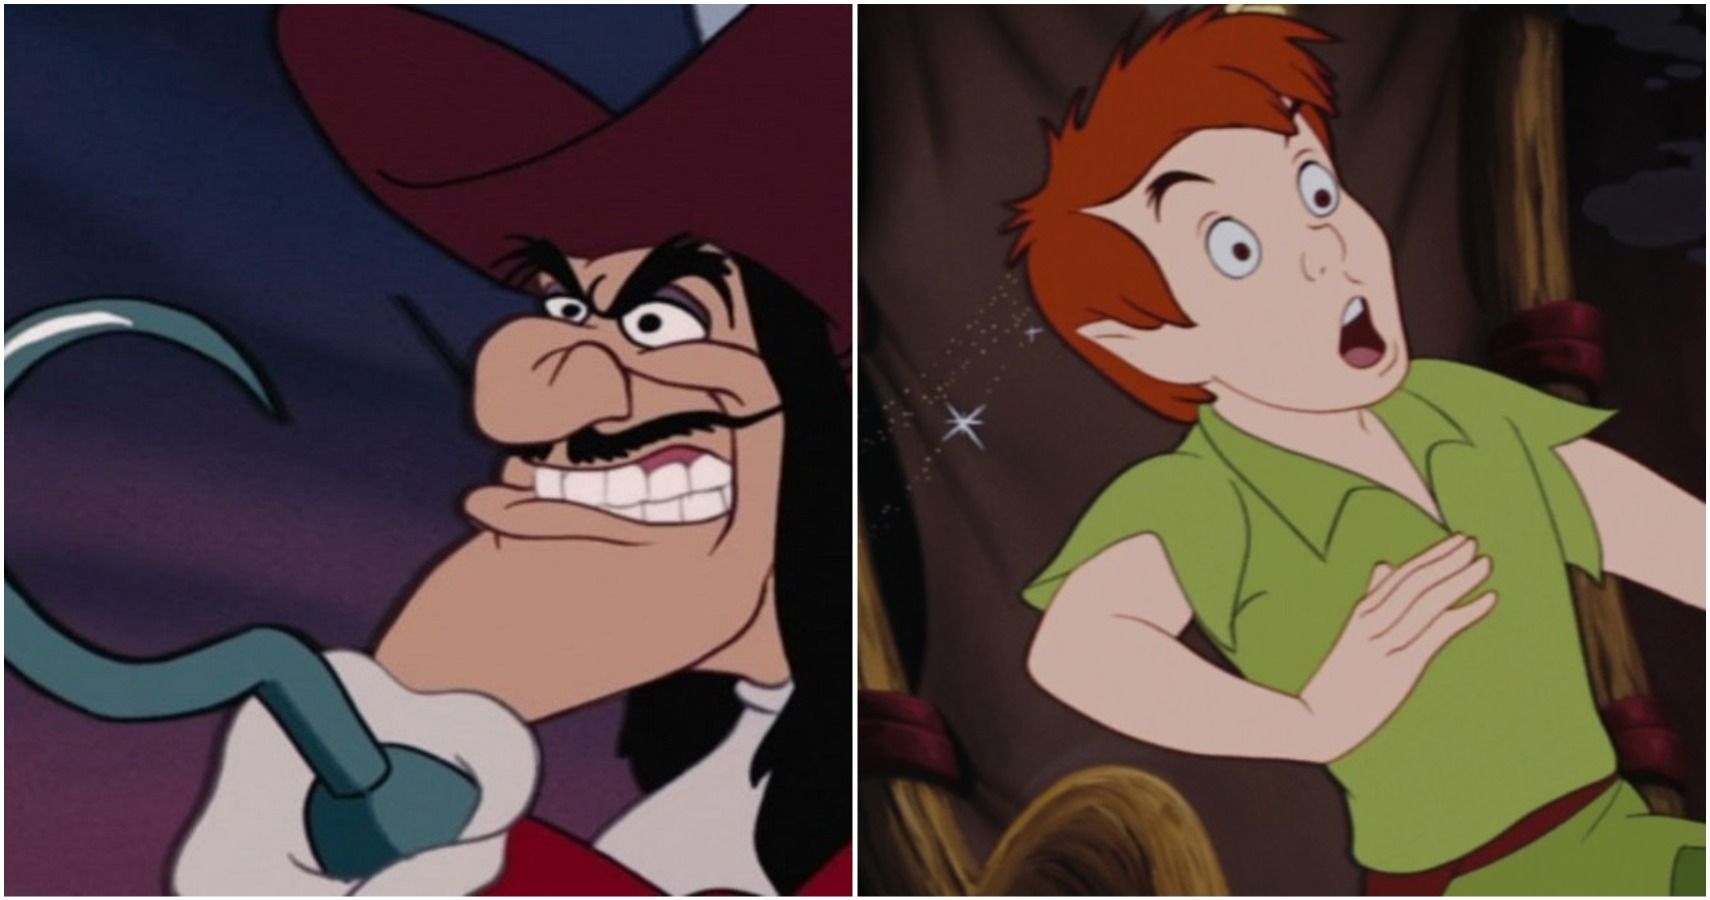 Peter Pan: 5 Things That Didn't Age Well (& 5 That Are Timeless)